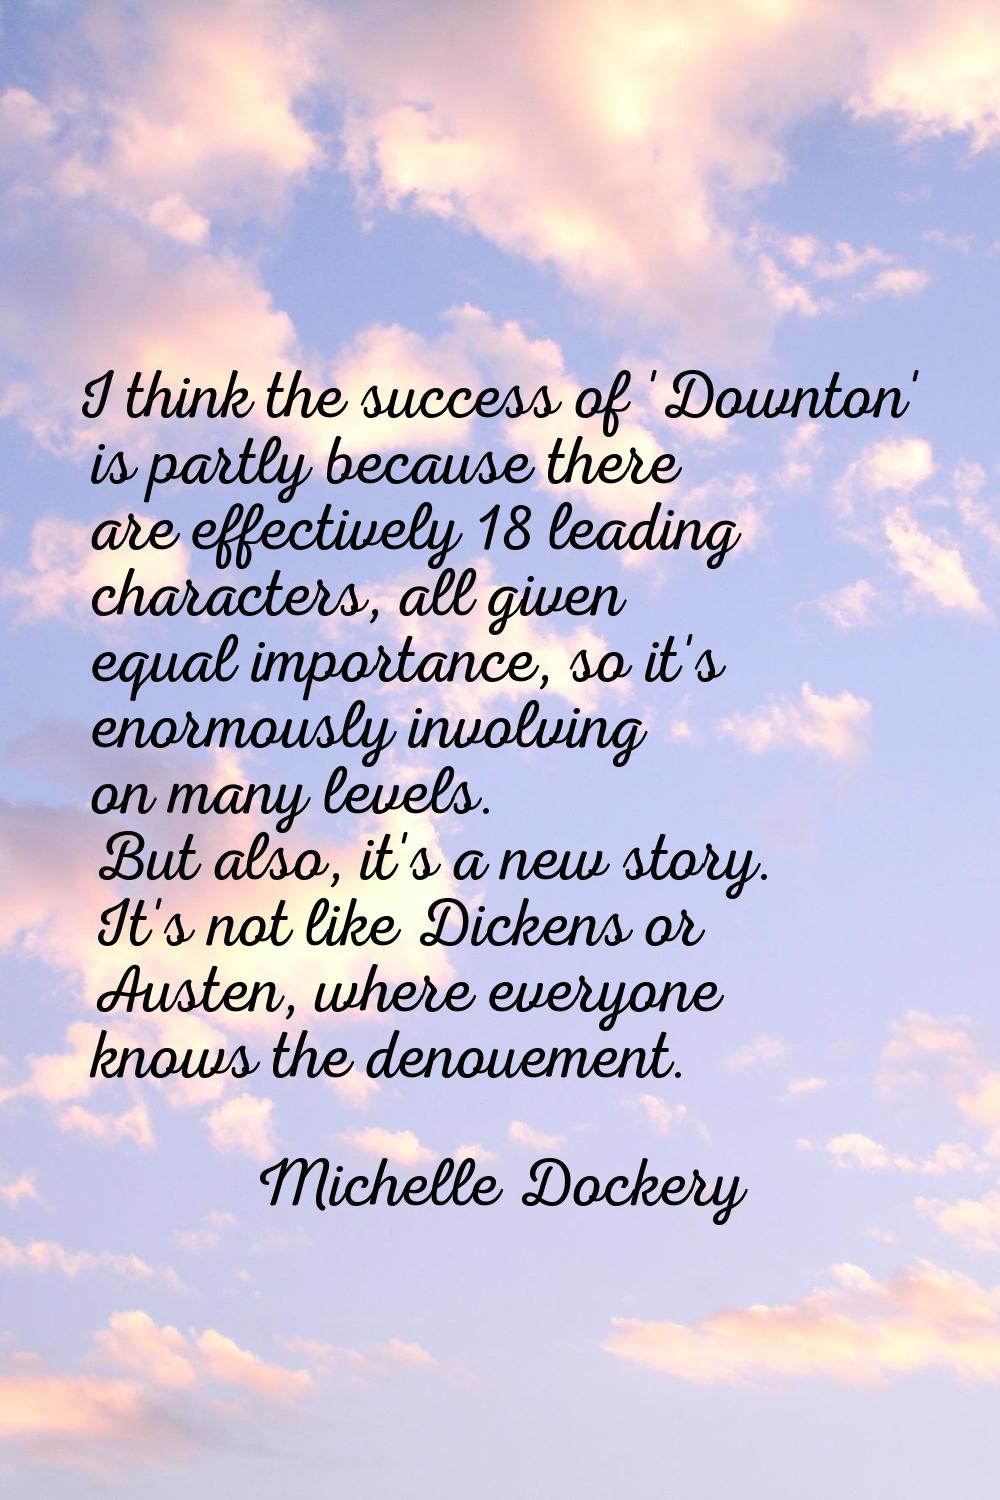 I think the success of 'Downton' is partly because there are effectively 18 leading characters, all